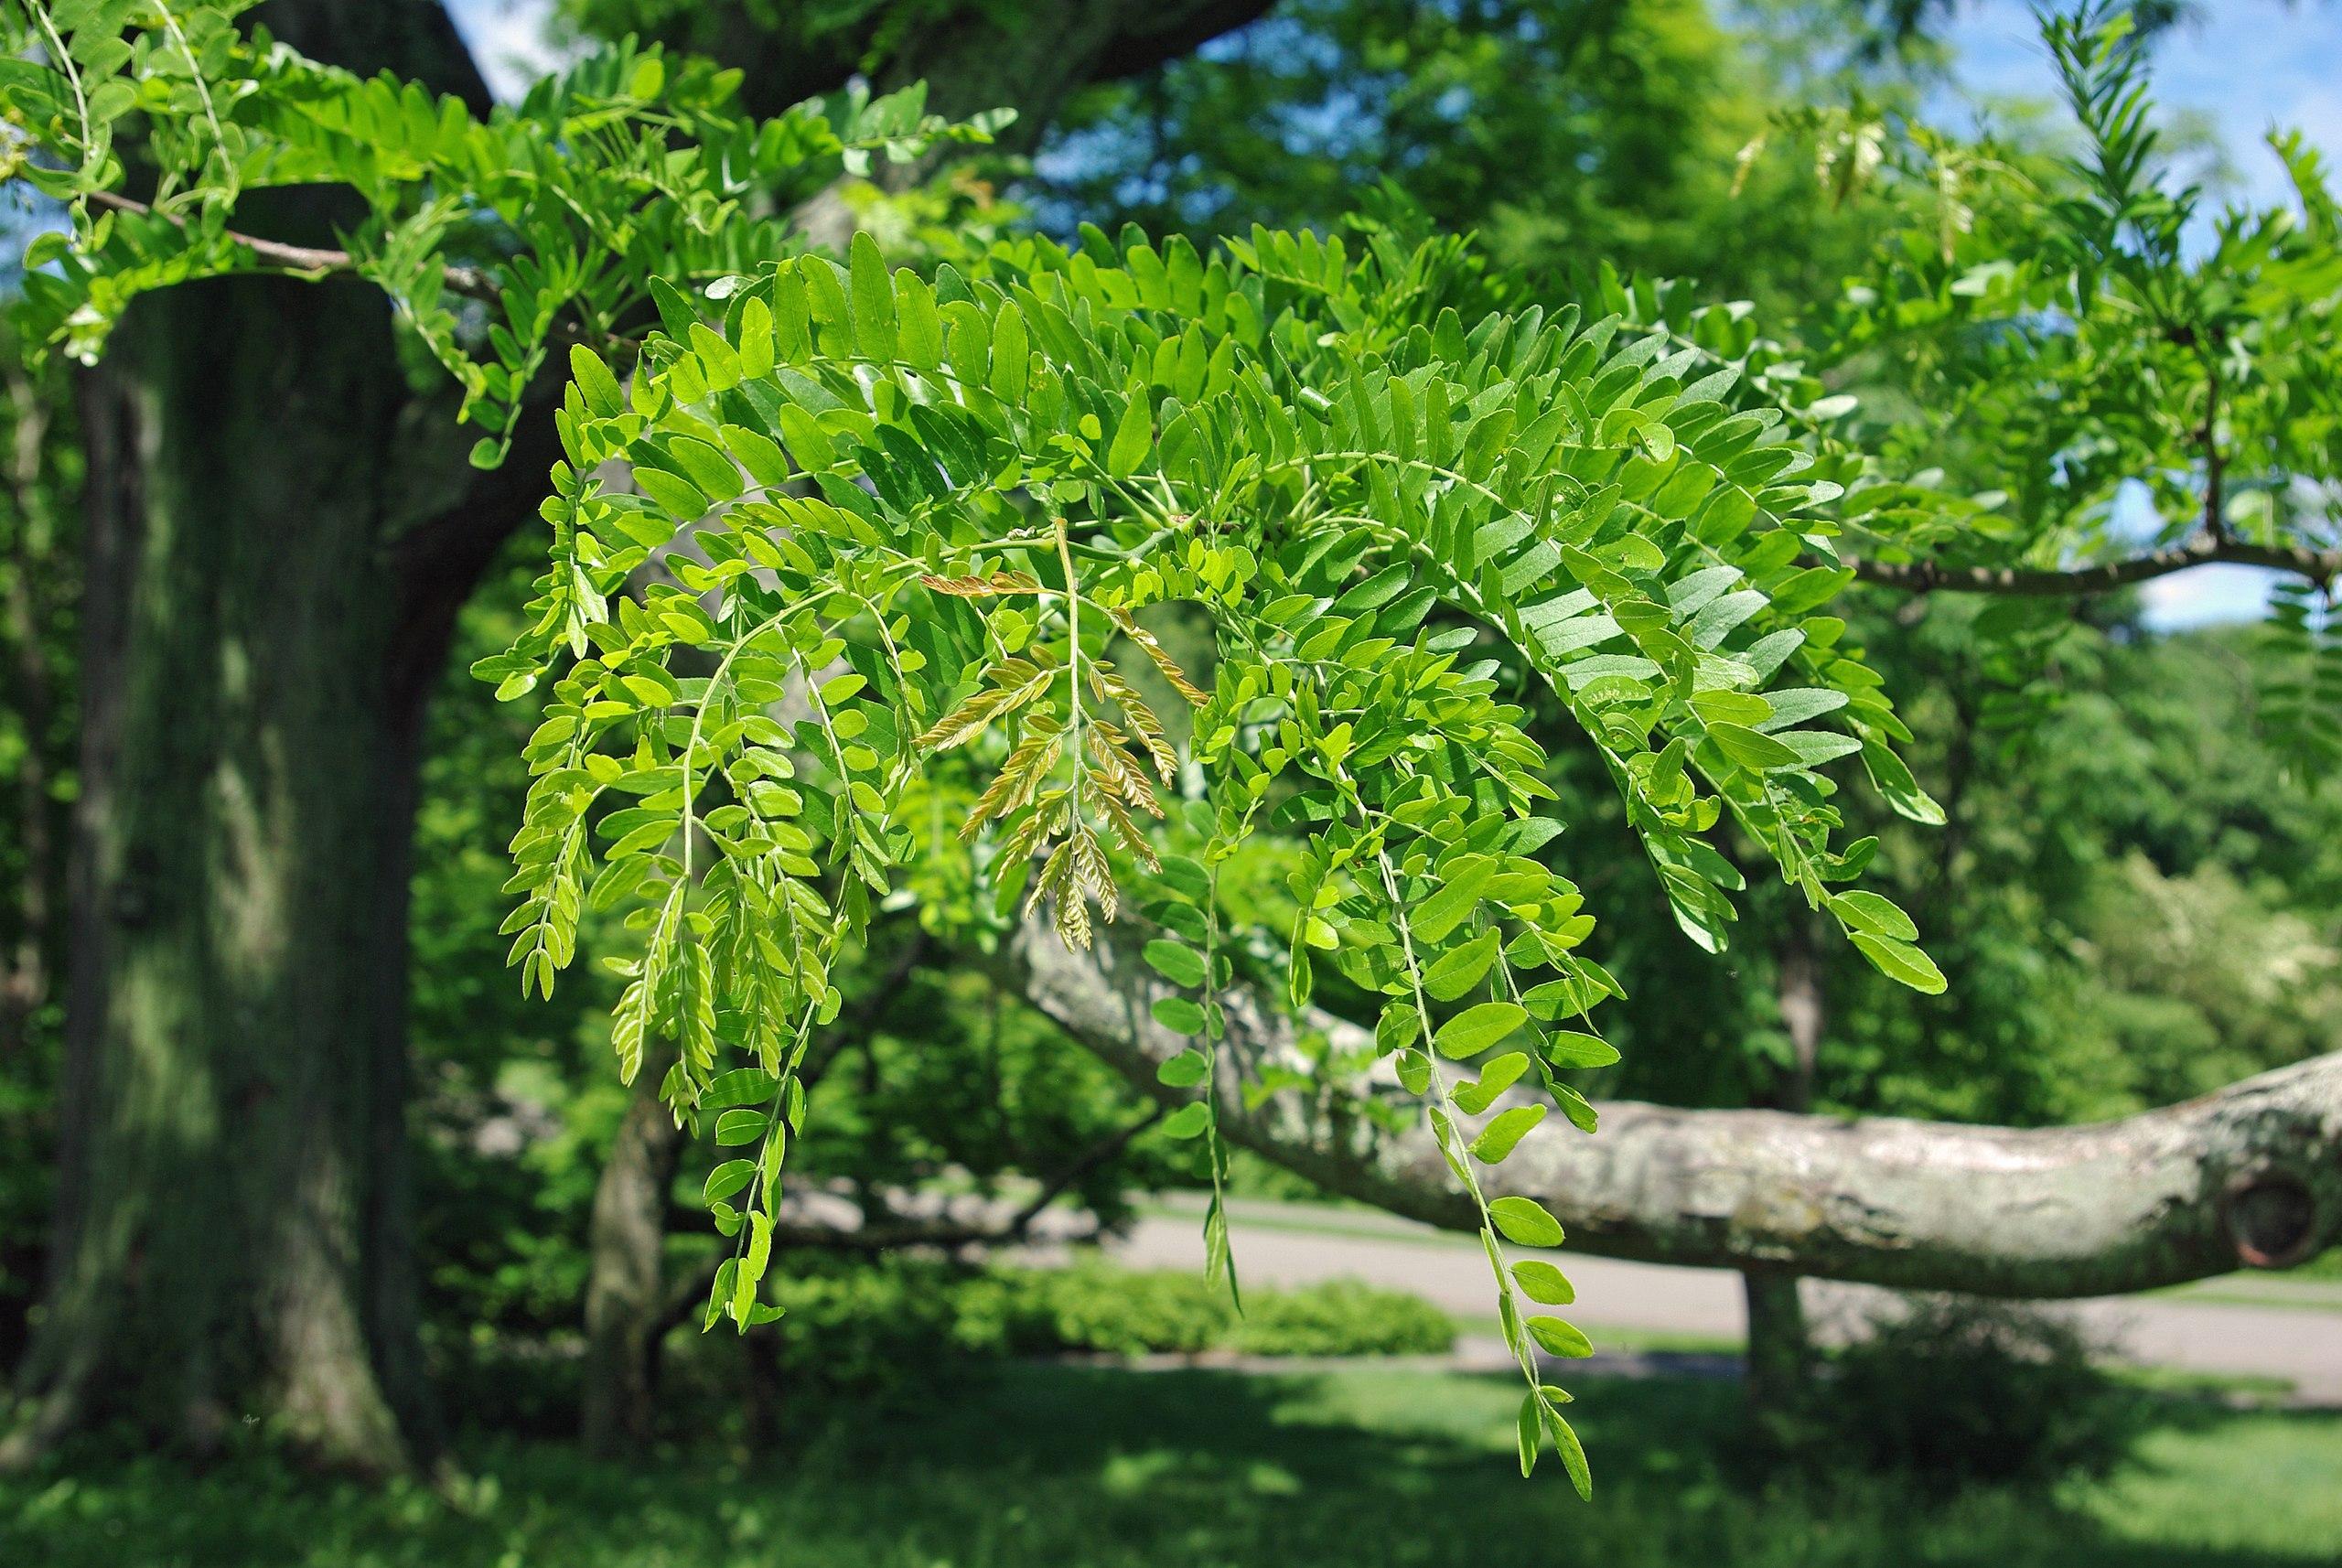 Green leaves with green stems and light-gray branches